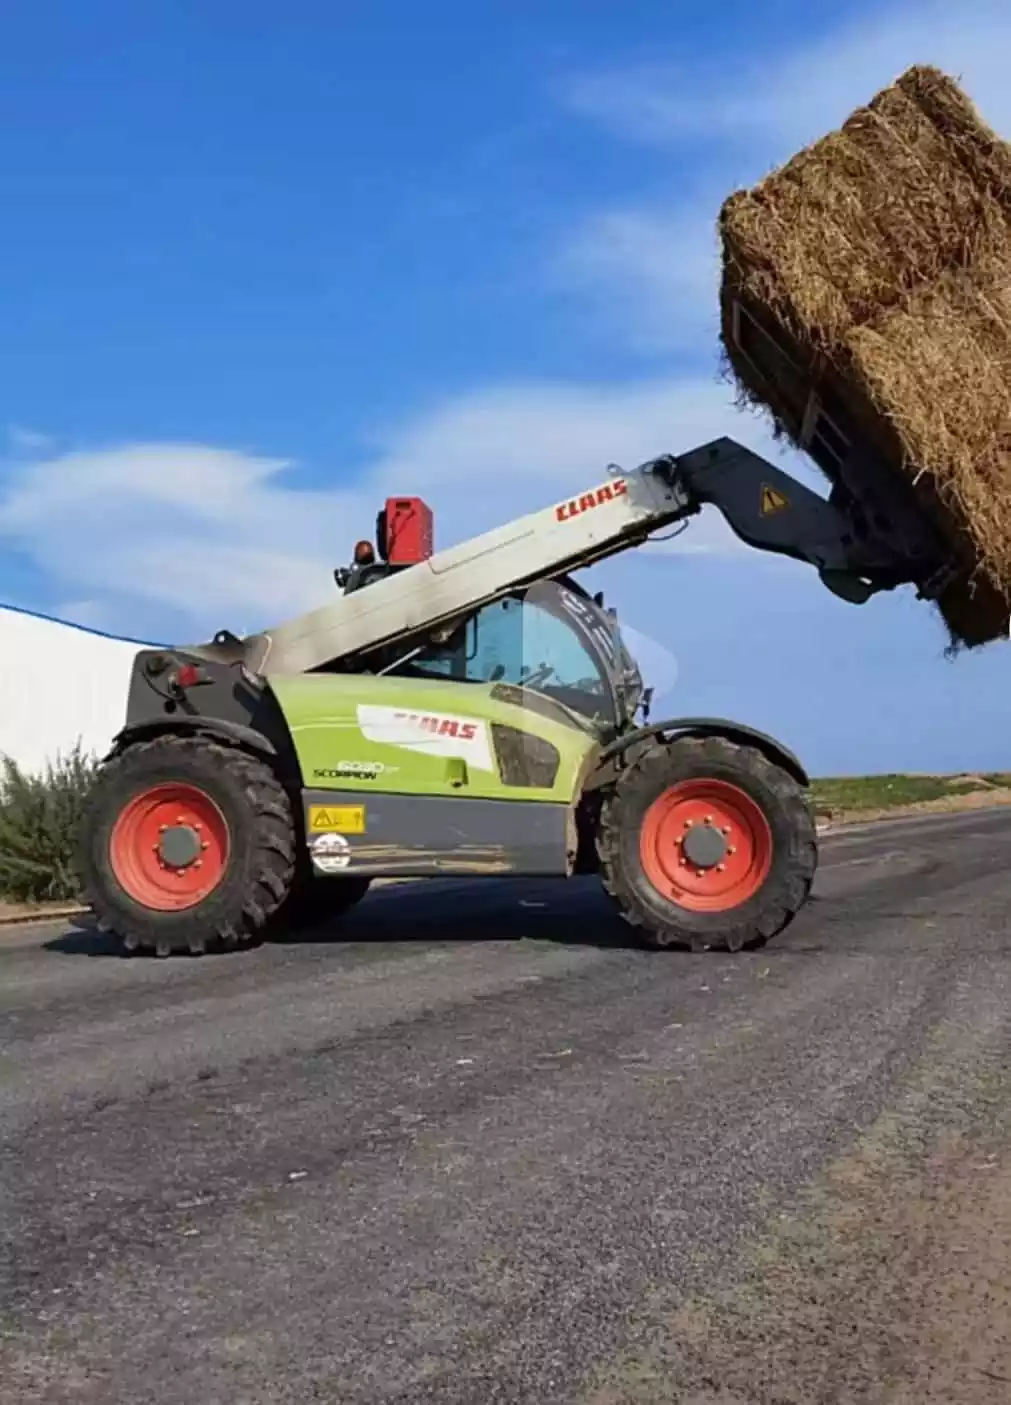 CLAAS second-hand multi-purpose off-road forklift